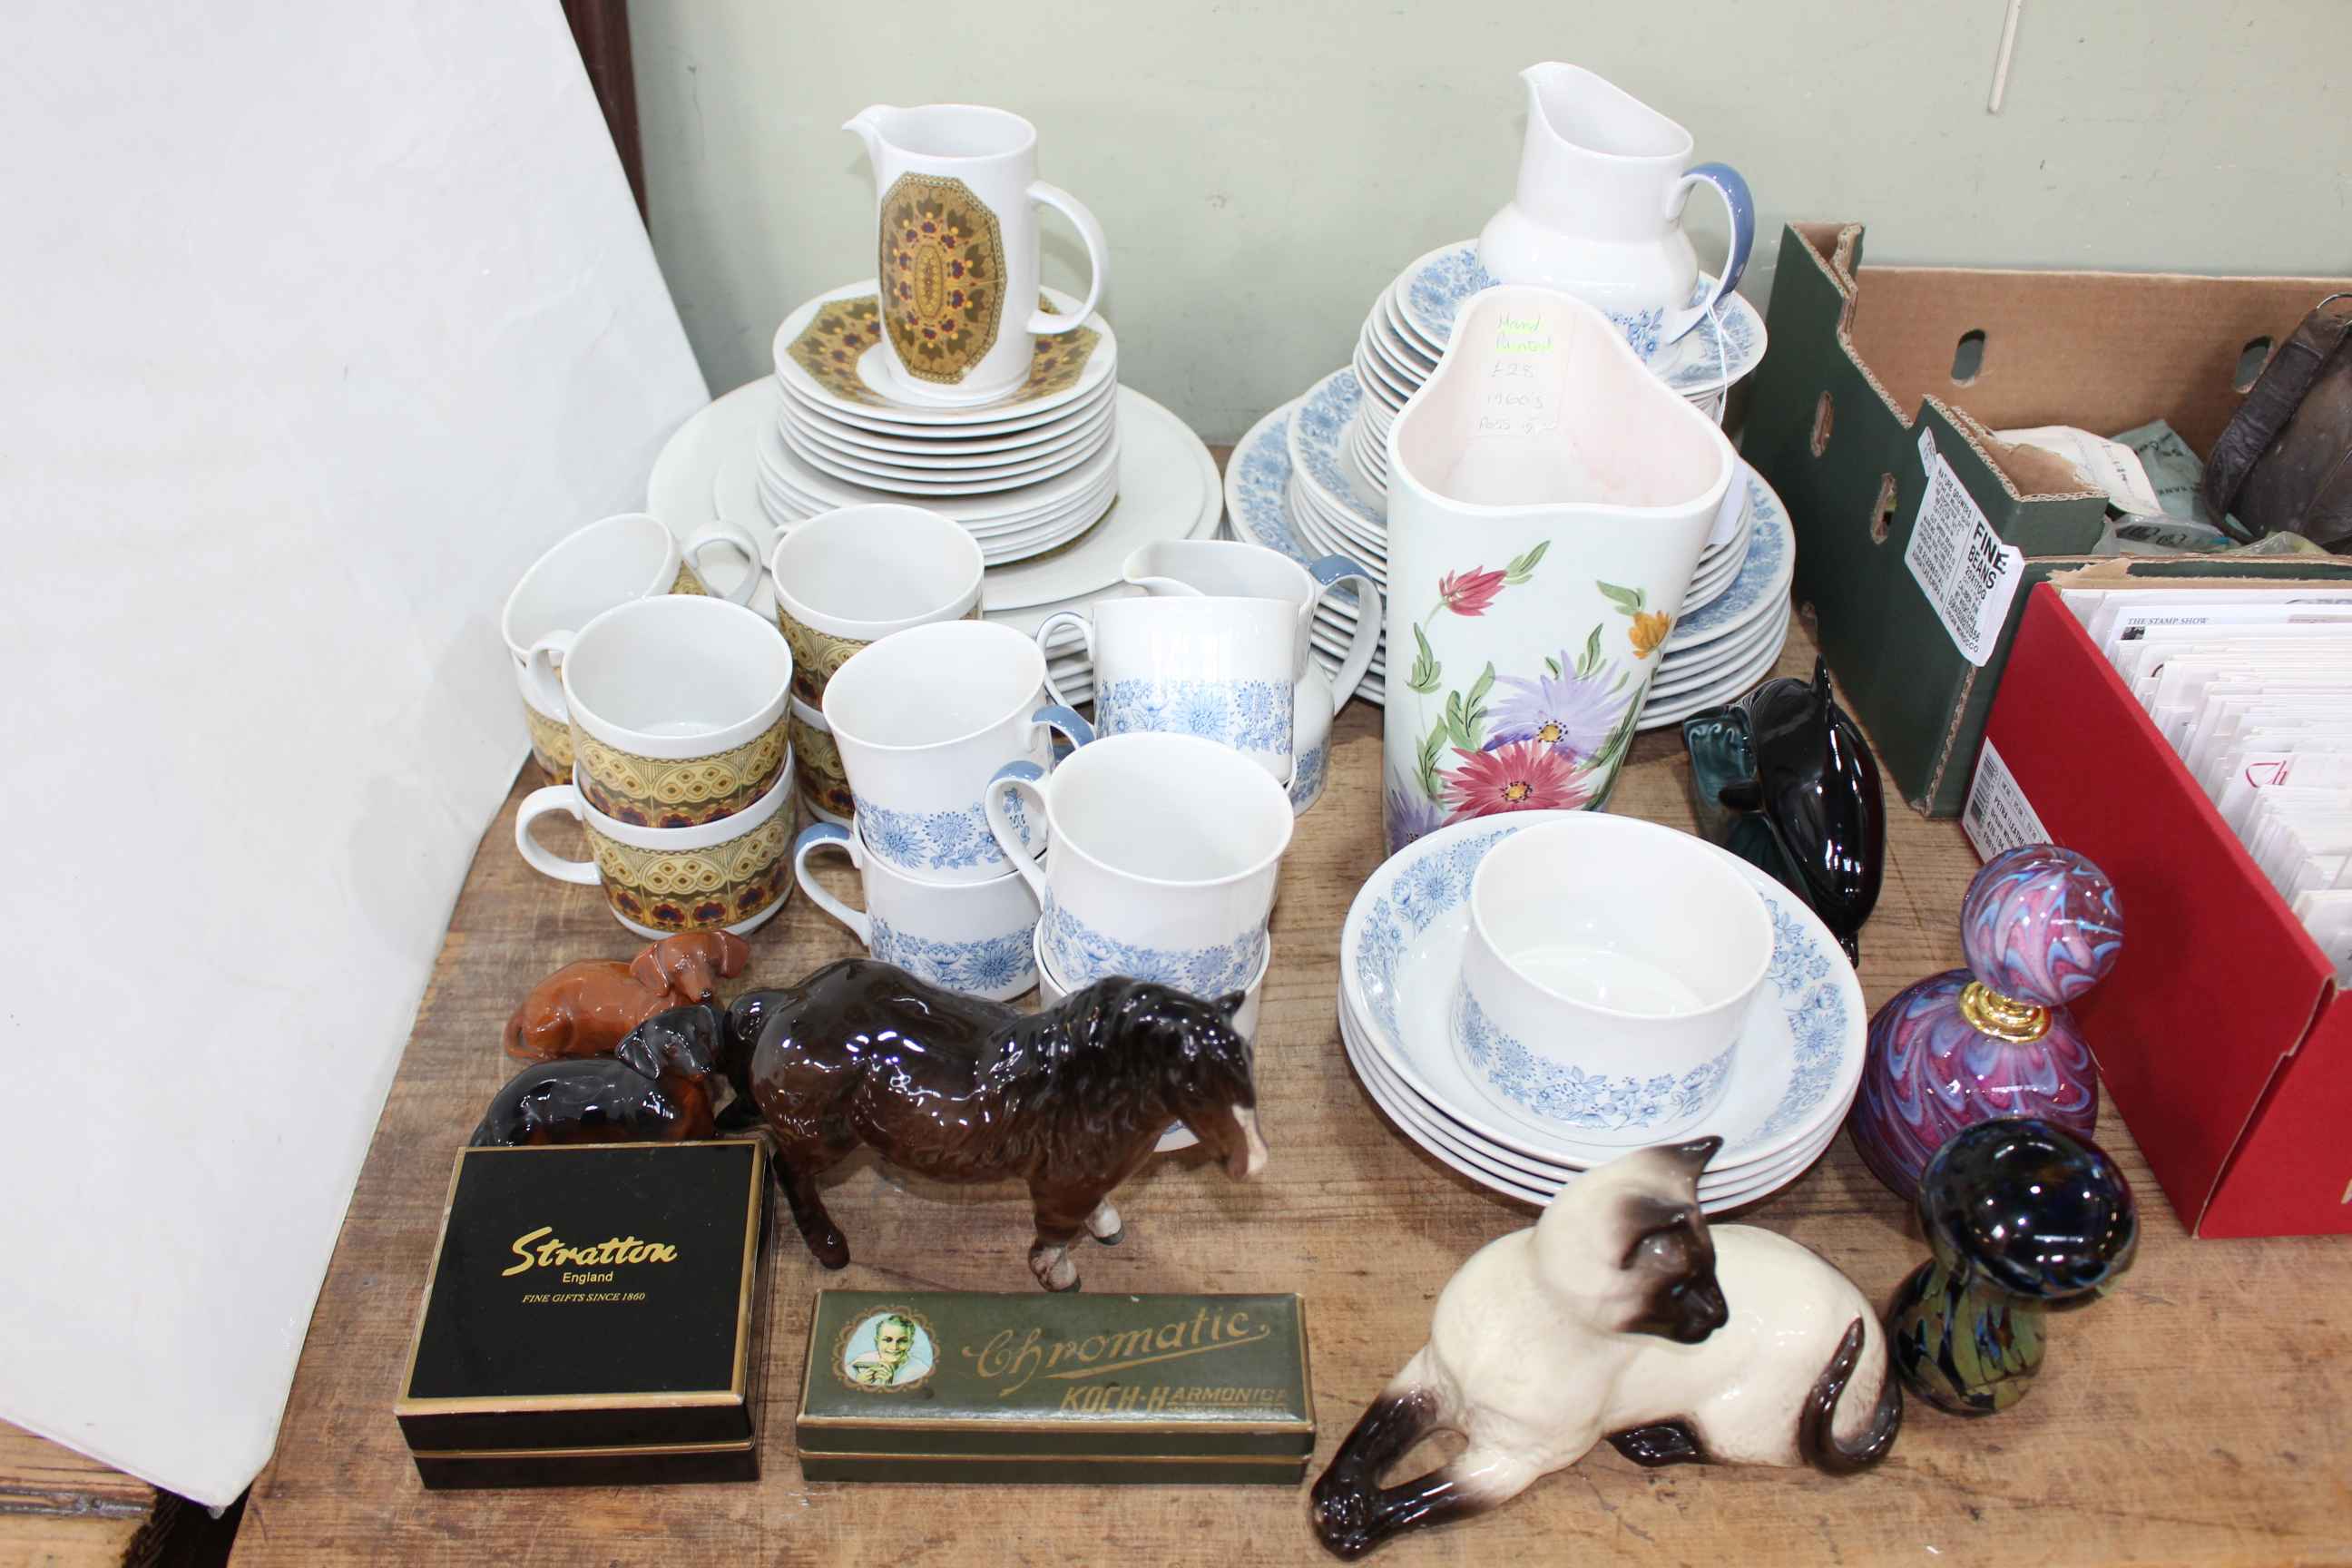 Royal Doulton Cranbourne and Parquet part table wares, Beswick, Radford vase, Poole, paperweights,